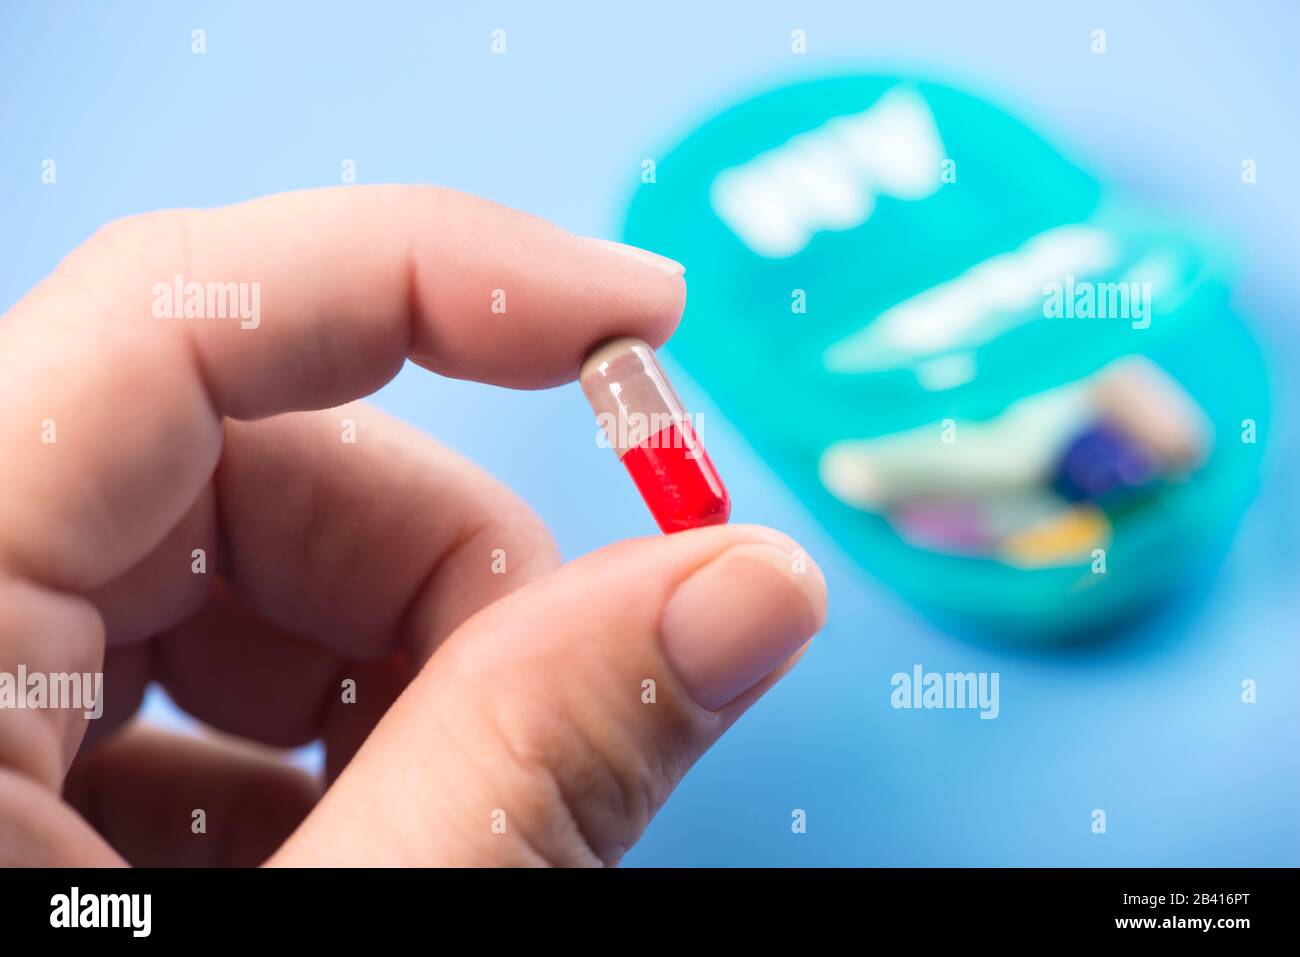 Colorful capsule in patient's hand with daily pill dispenser on blue background. Stock Photo